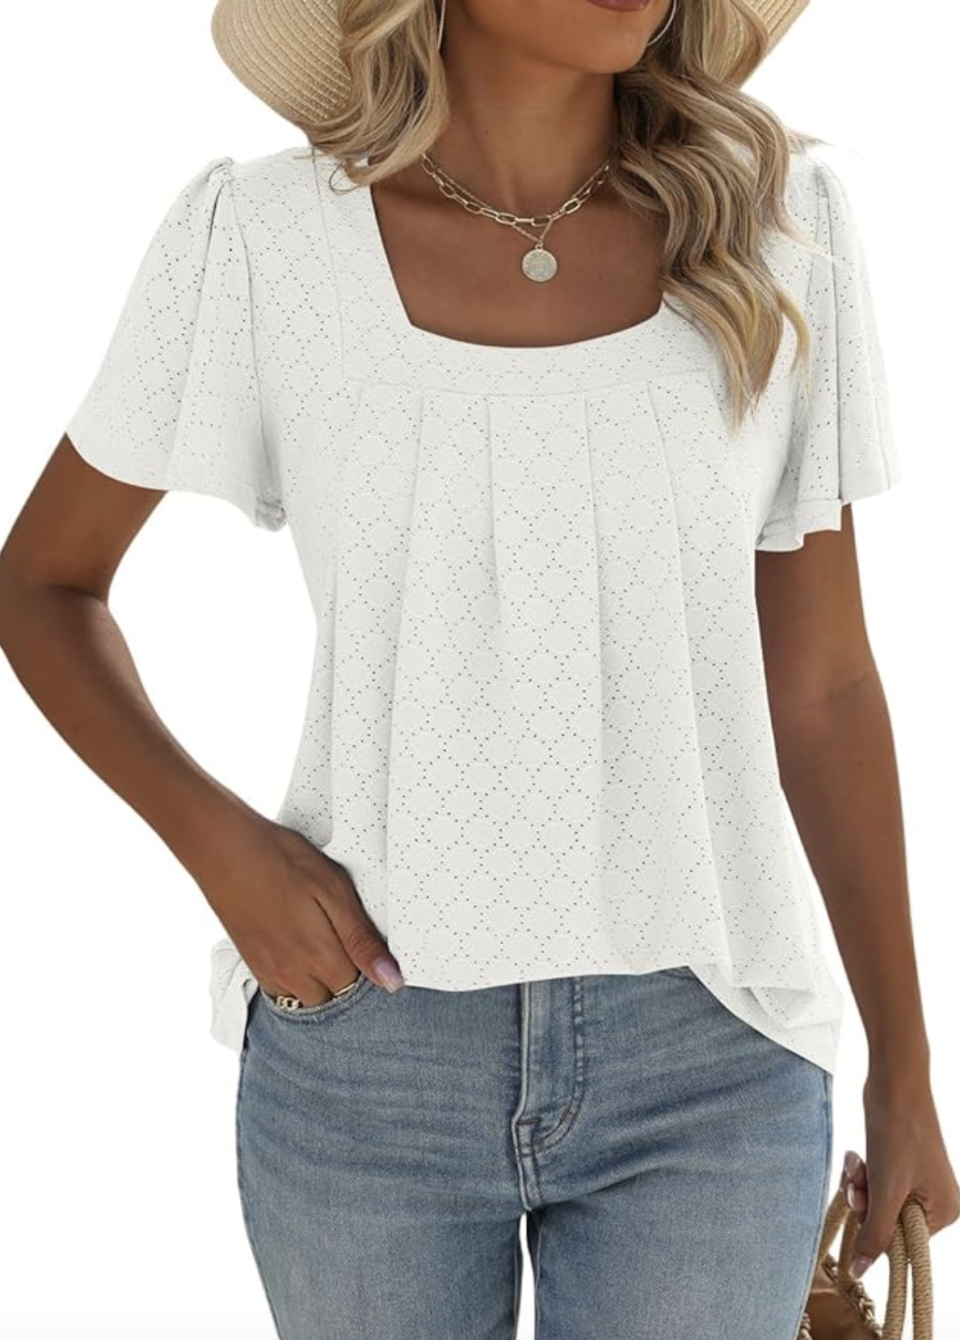 Take home this flattering summer top for just $35 (Photo via Amazon), isermeo Summer Tops for Women Pleated Square Neck Ruffle Sleeve Shirts Casual Loose Flowy Curved Hem Tunic S-XXL